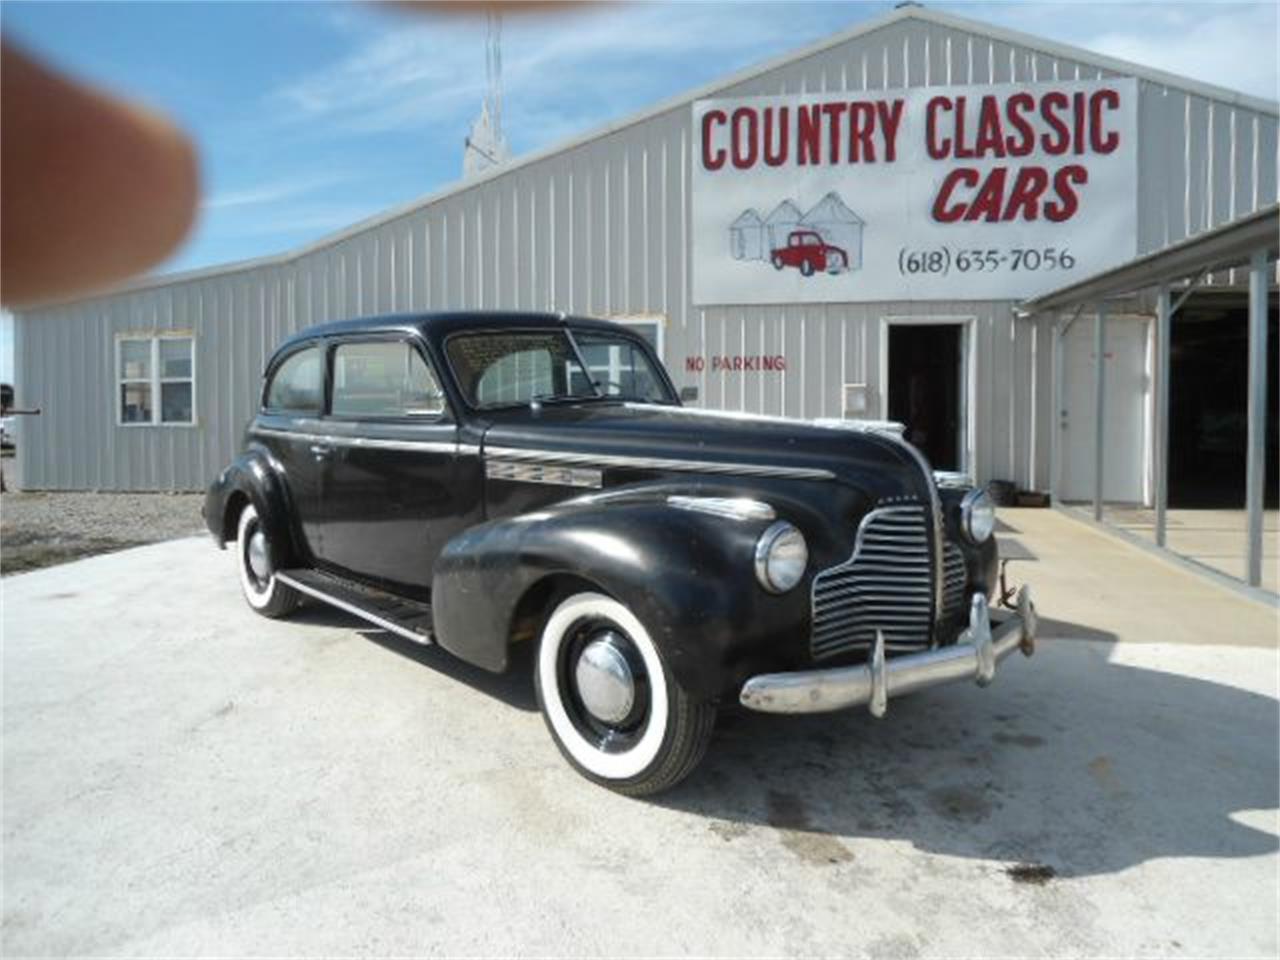 1940 40 BUICK SPECIAL Parking Signe 